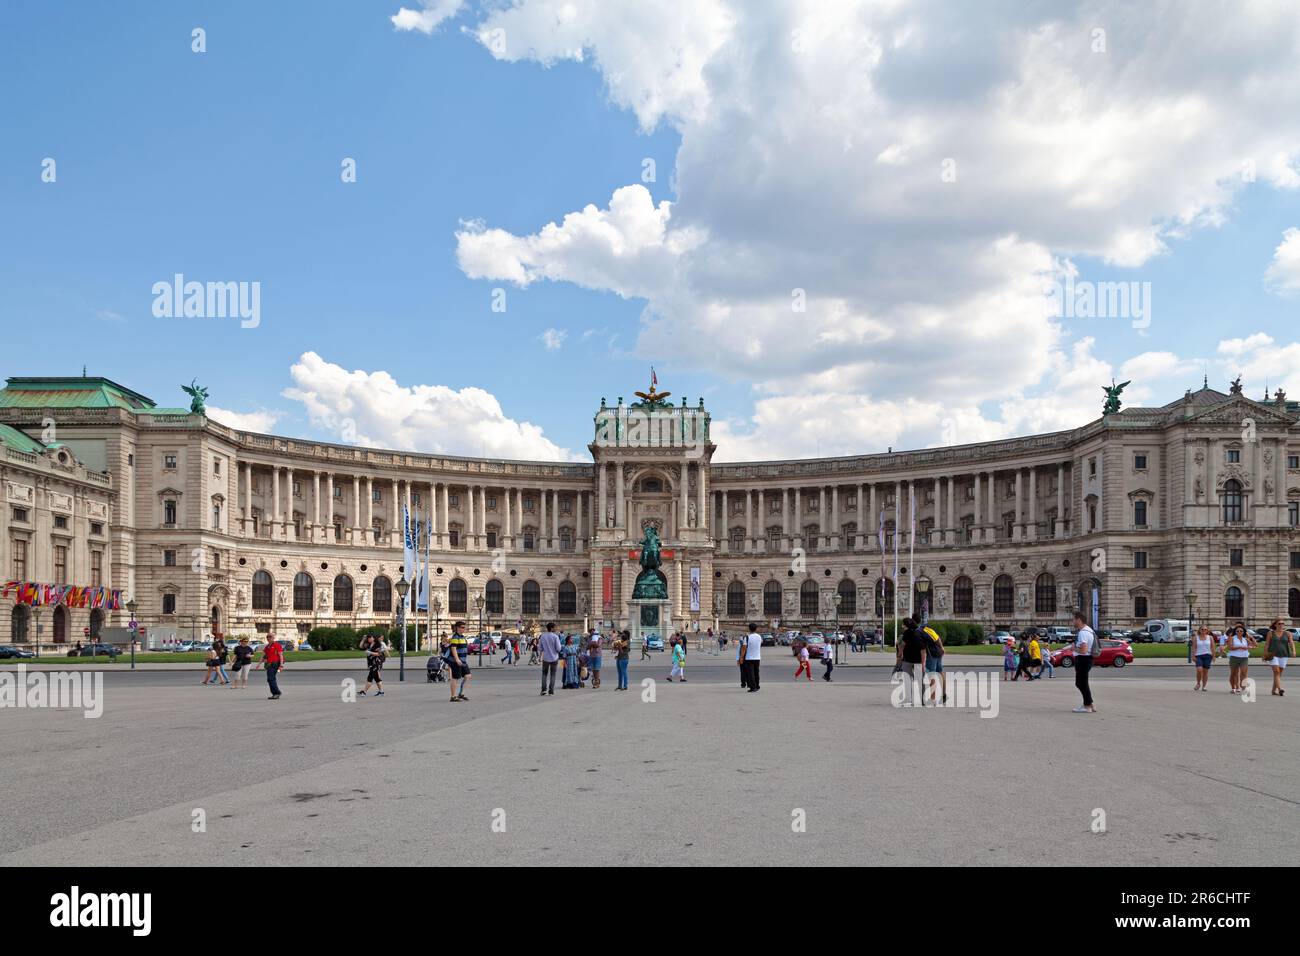 Vienna, Austria - June 17 2018: The Austrian National Library is the largest library in Austria, with more than 12 million items in its various collec Stock Photo